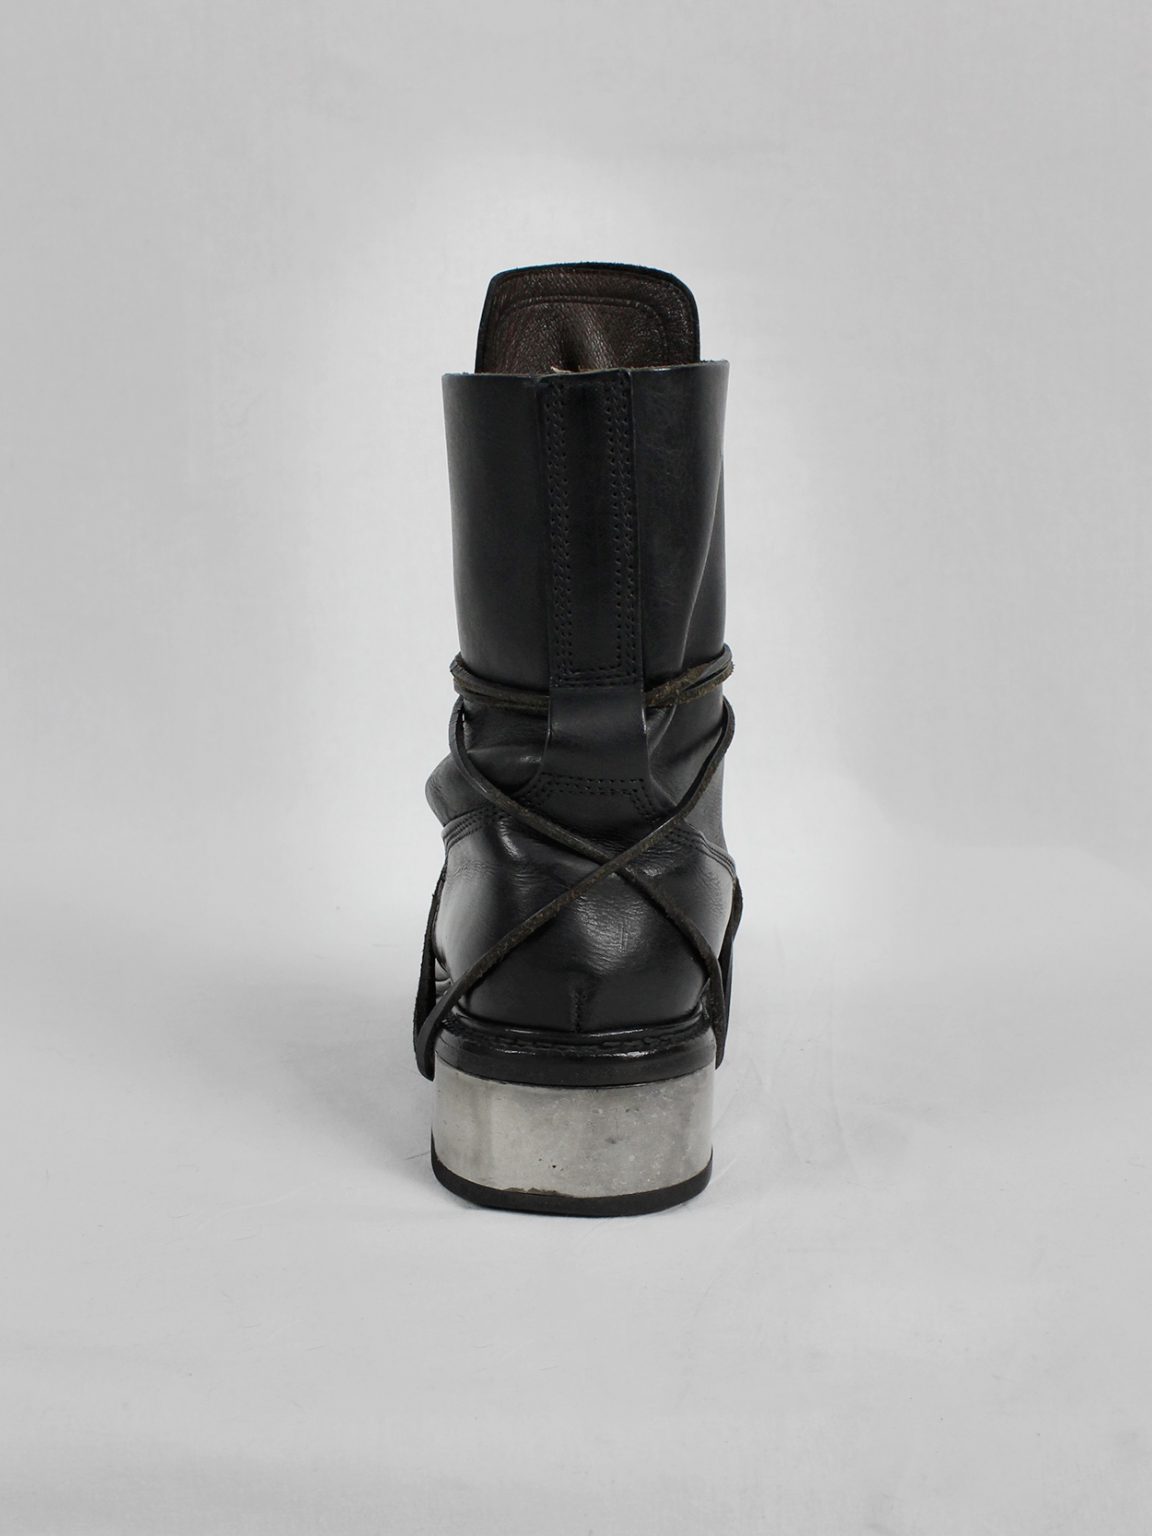 Dirk Bikkembergs black tall boots with laces through the metal heel (39) — late 90's